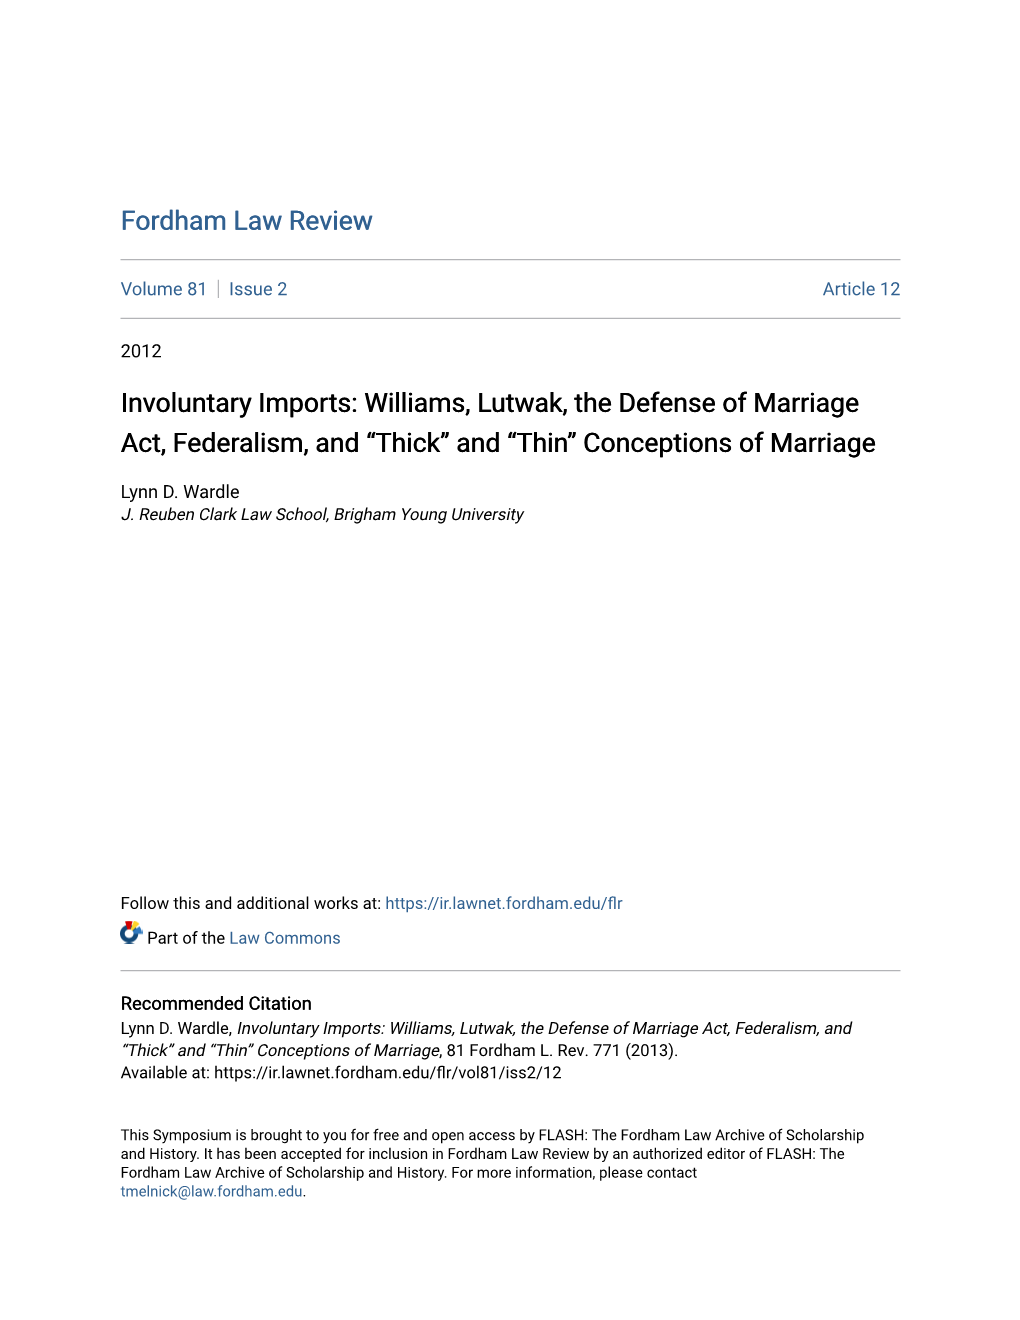 Williams, Lutwak, the Defense of Marriage Act, Federalism, and “Thick” and “Thin” Conceptions of Marriage